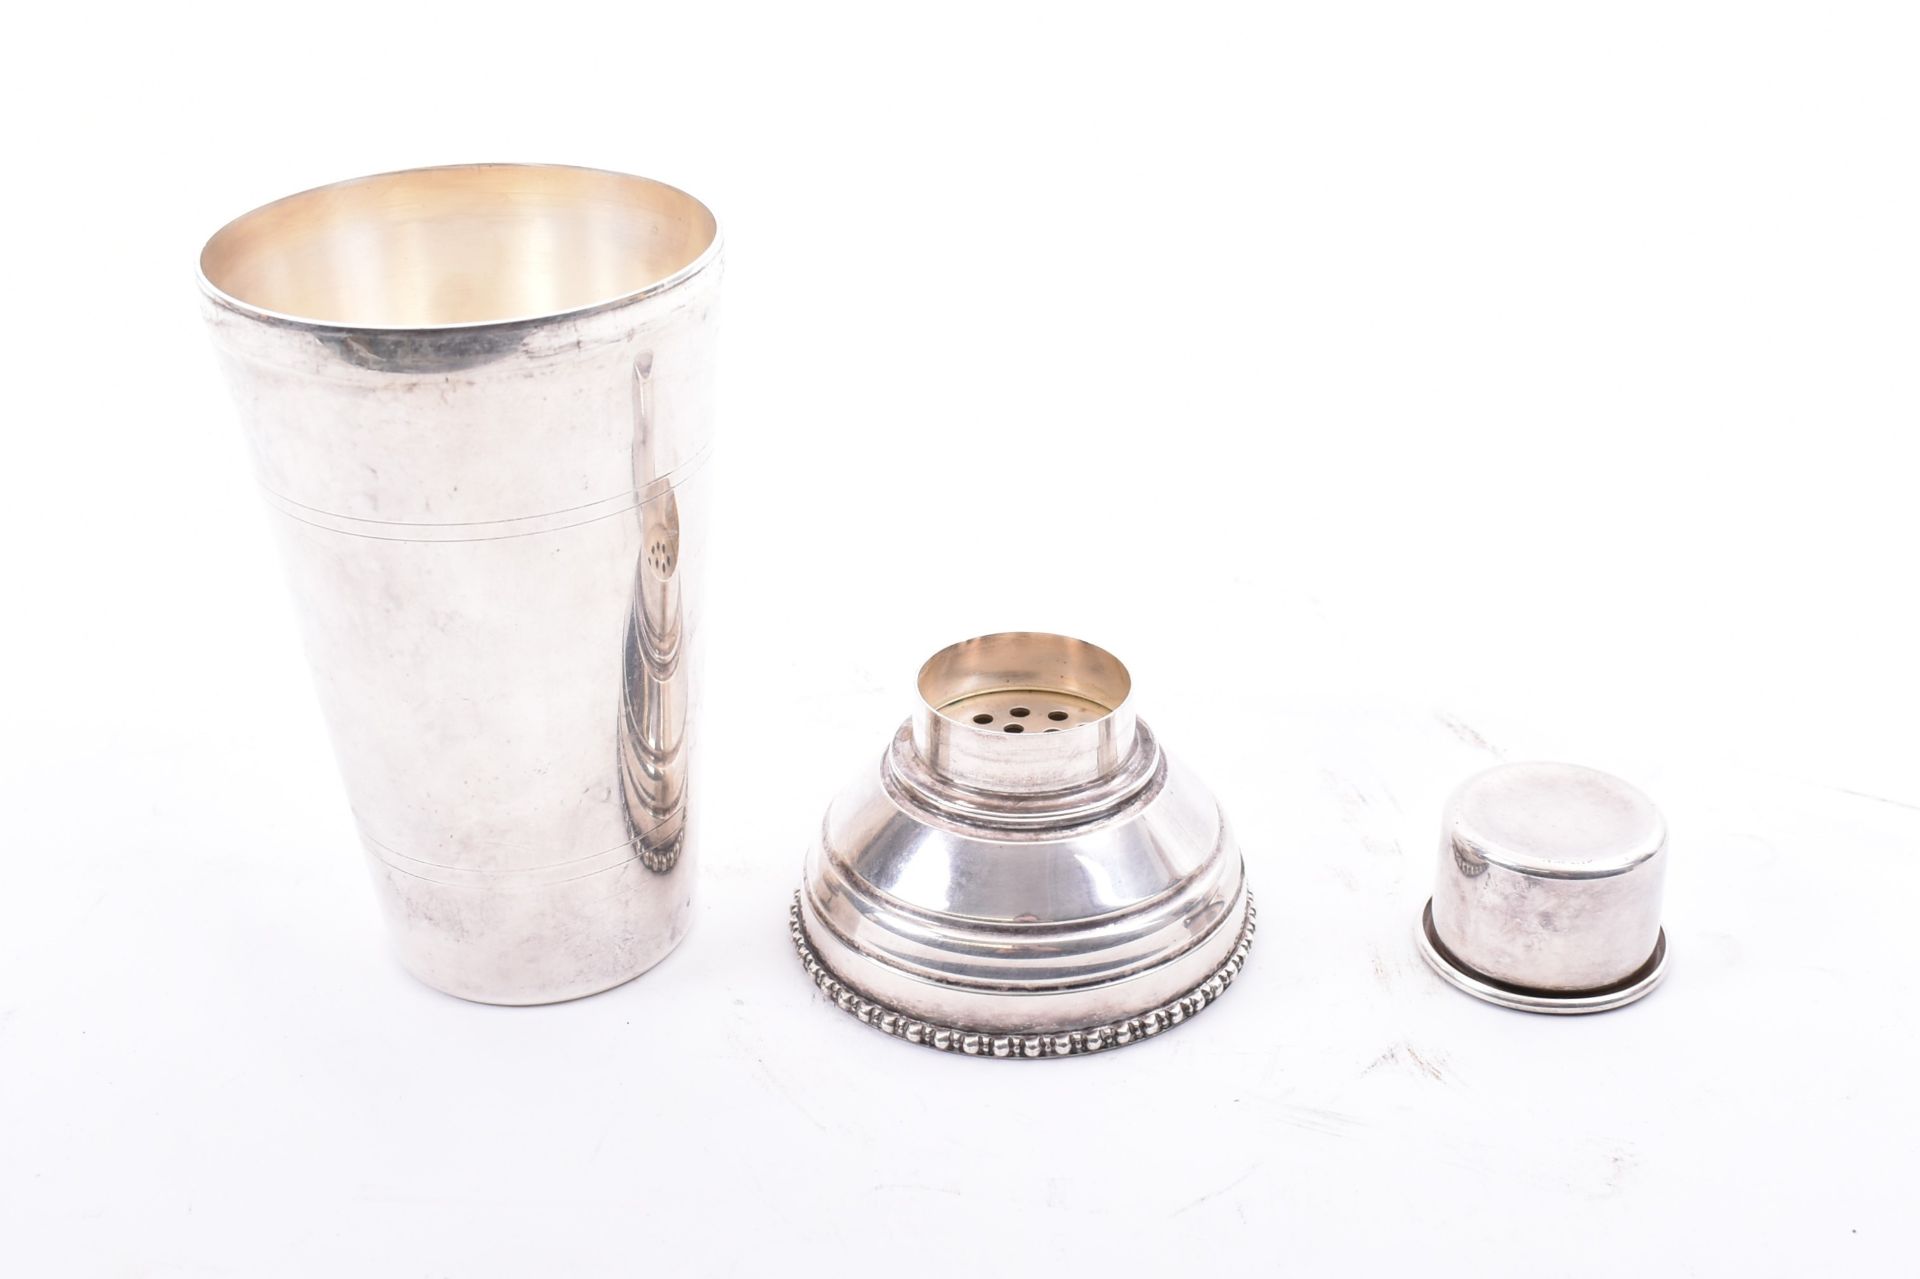 1930s ART DECO SILVER PLATE COCKTAIL DRINKS SHAKER - Image 5 of 6